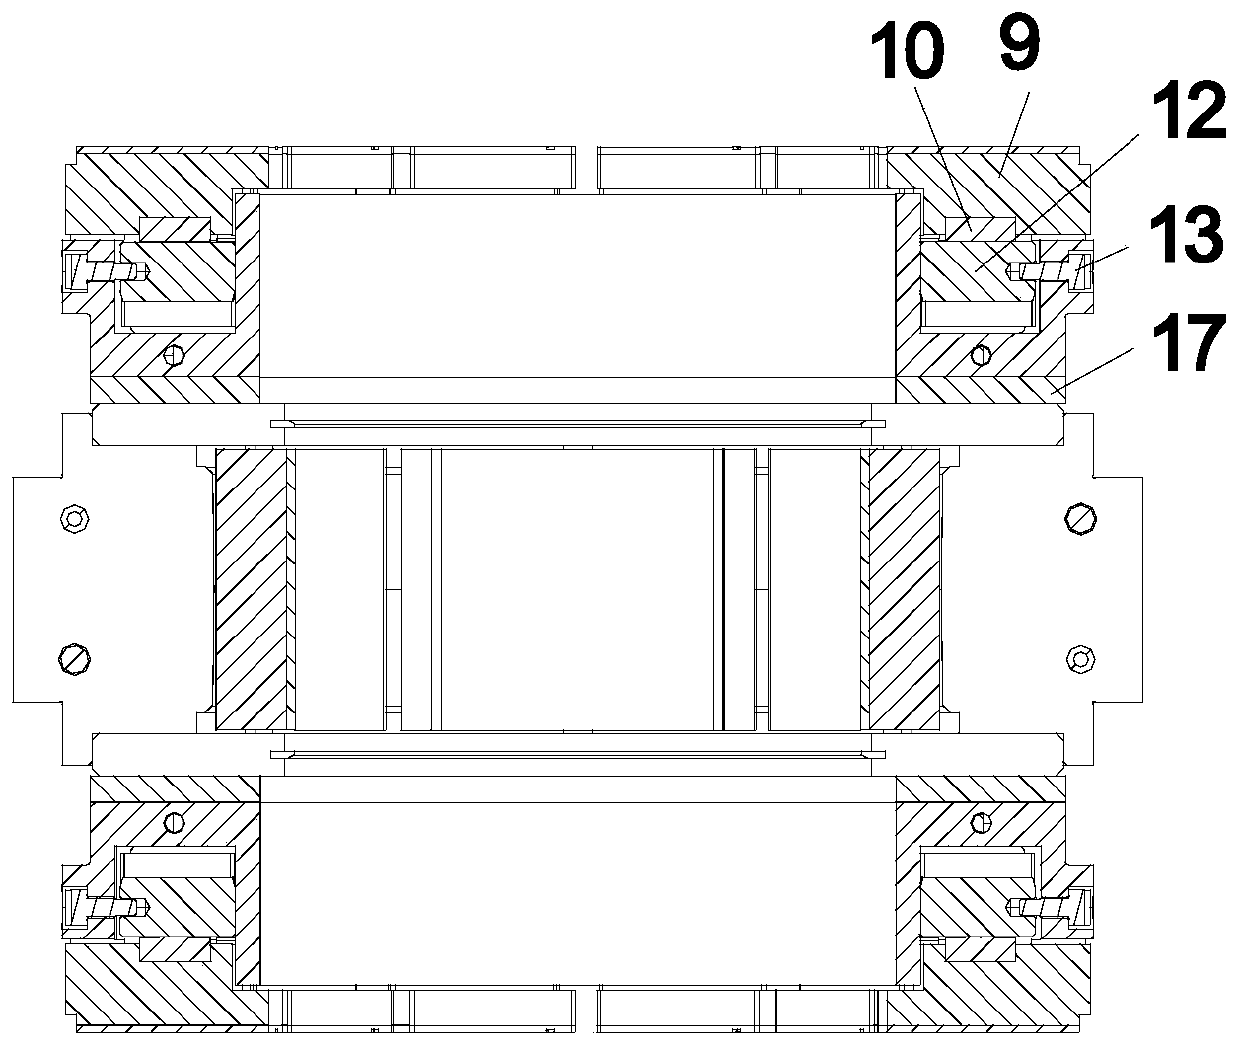 Steam turbine tilting pad supporting thrust combined bearing